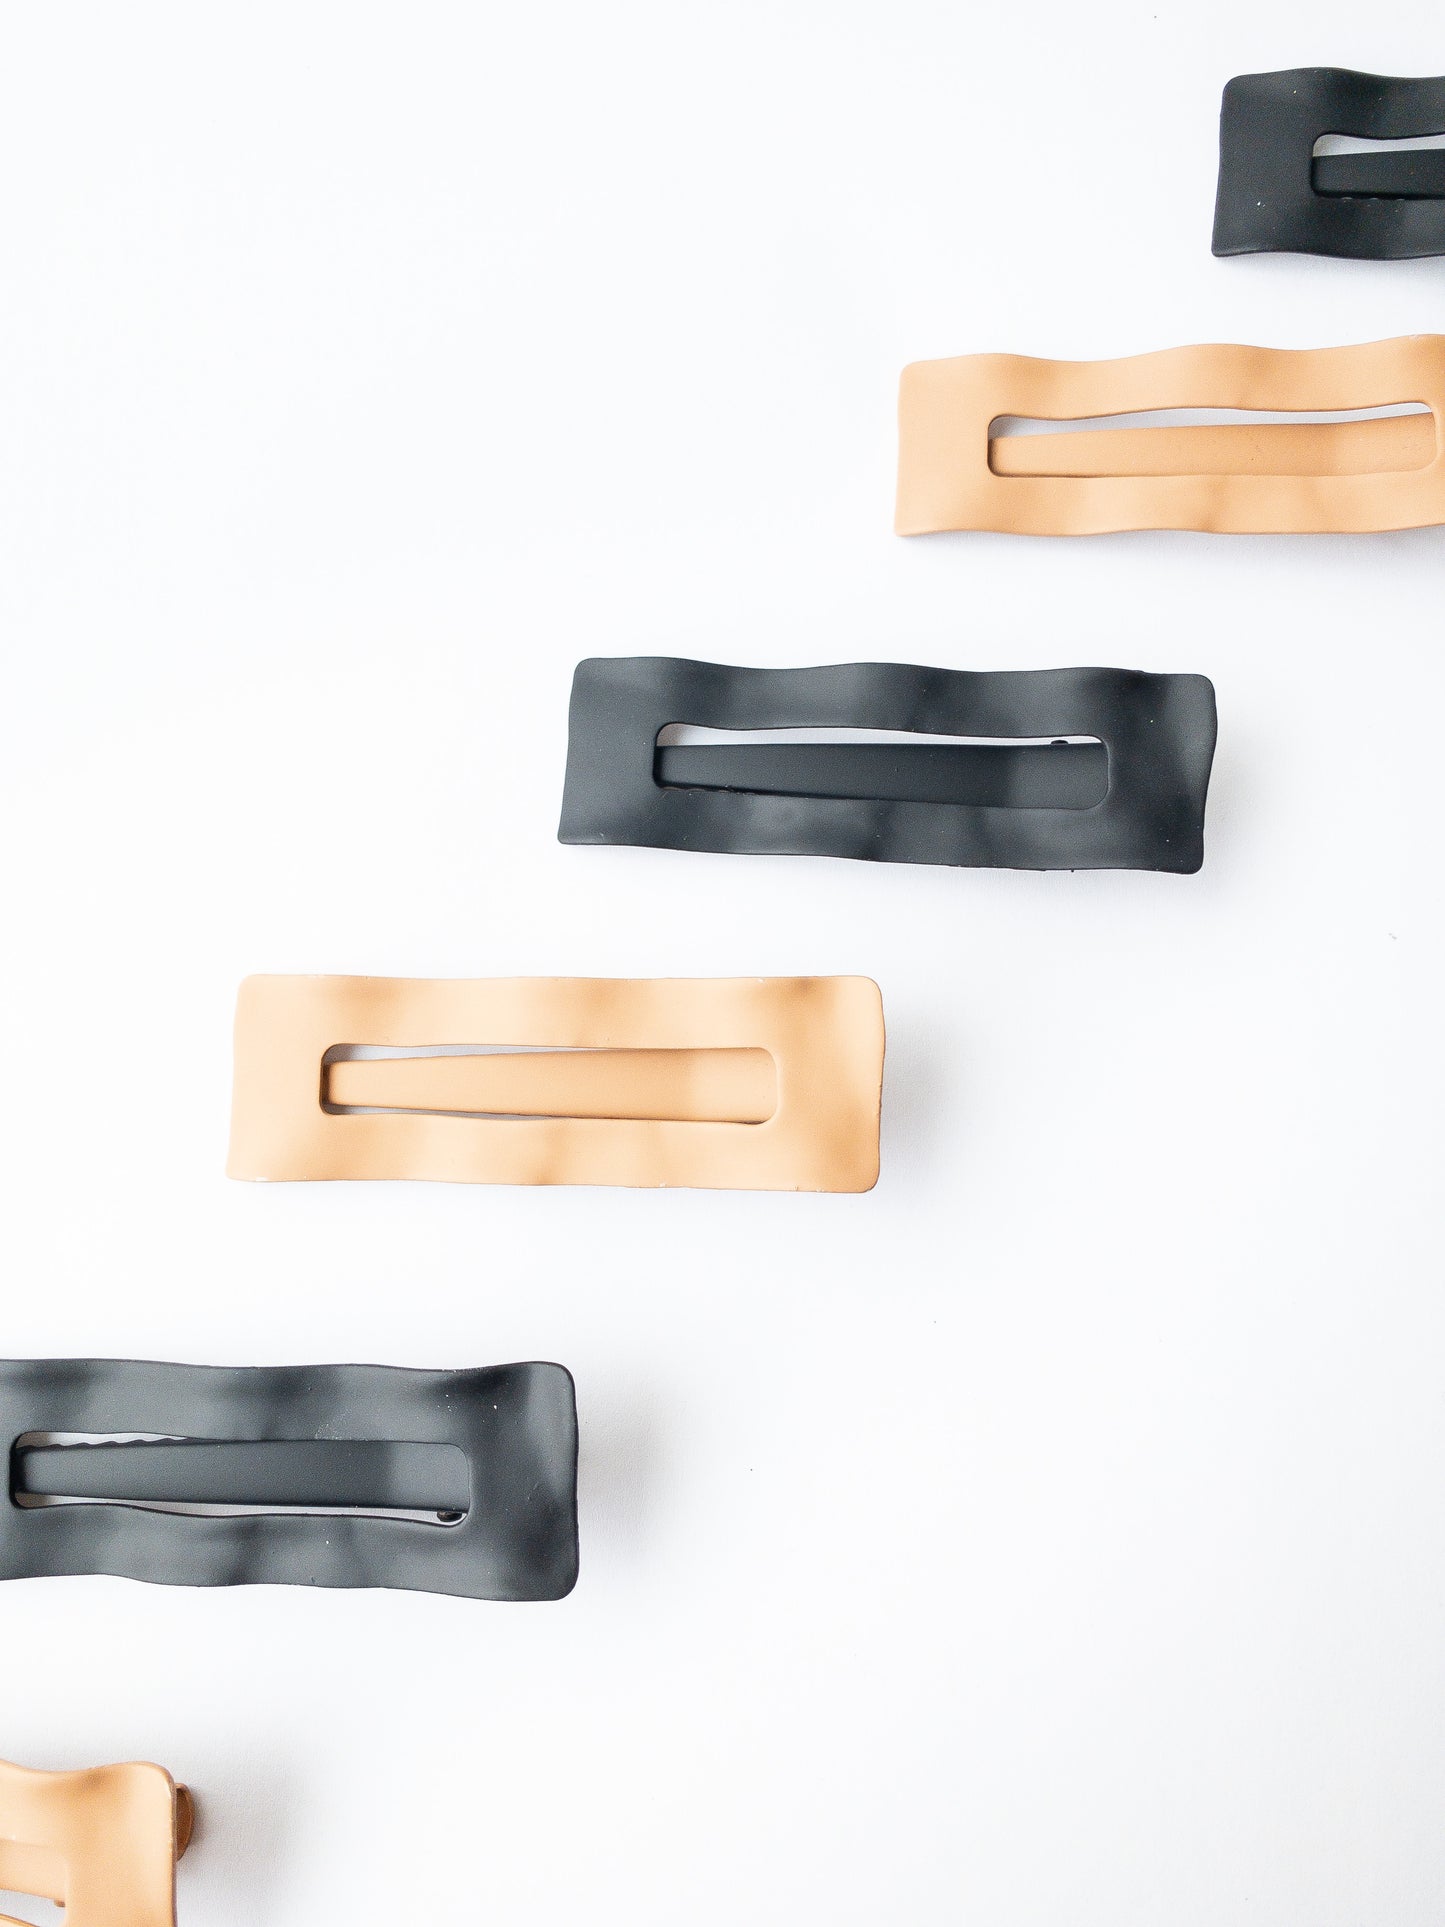 Wavy and chic, these barrettes come in two very modern matte colors: latte and black. These grip so well! And are sturdy yet lightweight to hold your hair beautifully. 